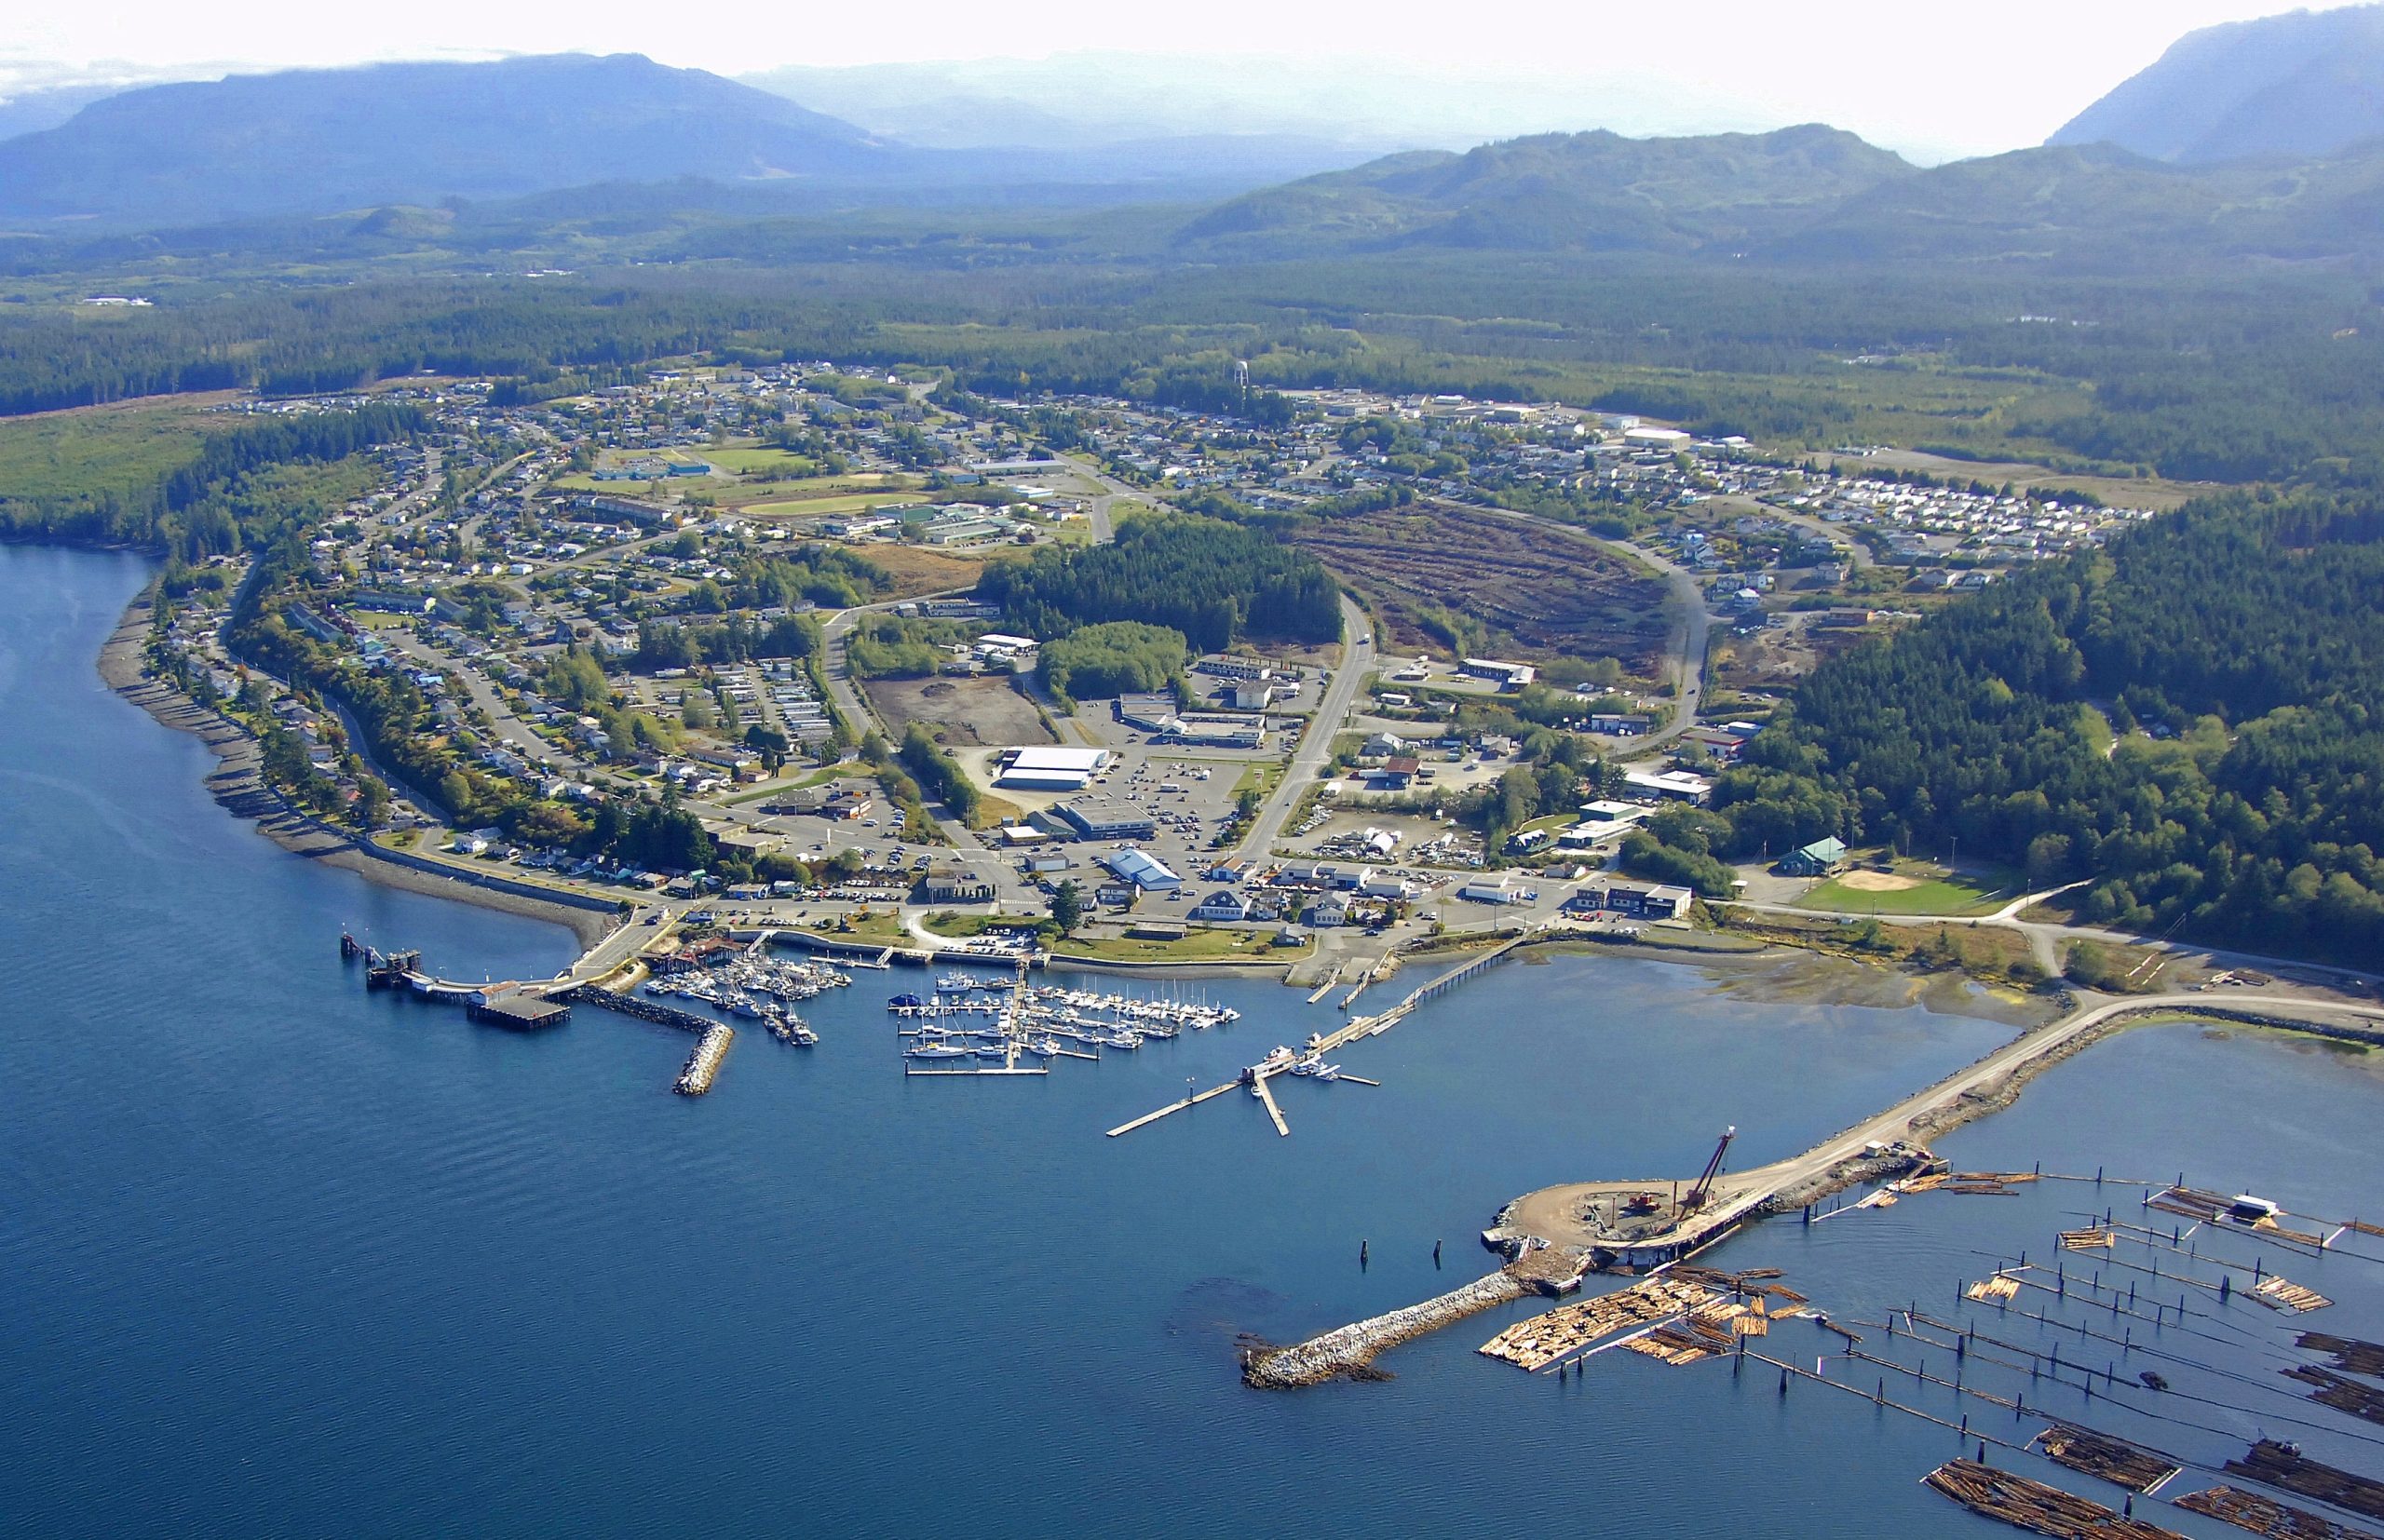 The town of Port McNeill on Vancouver Island